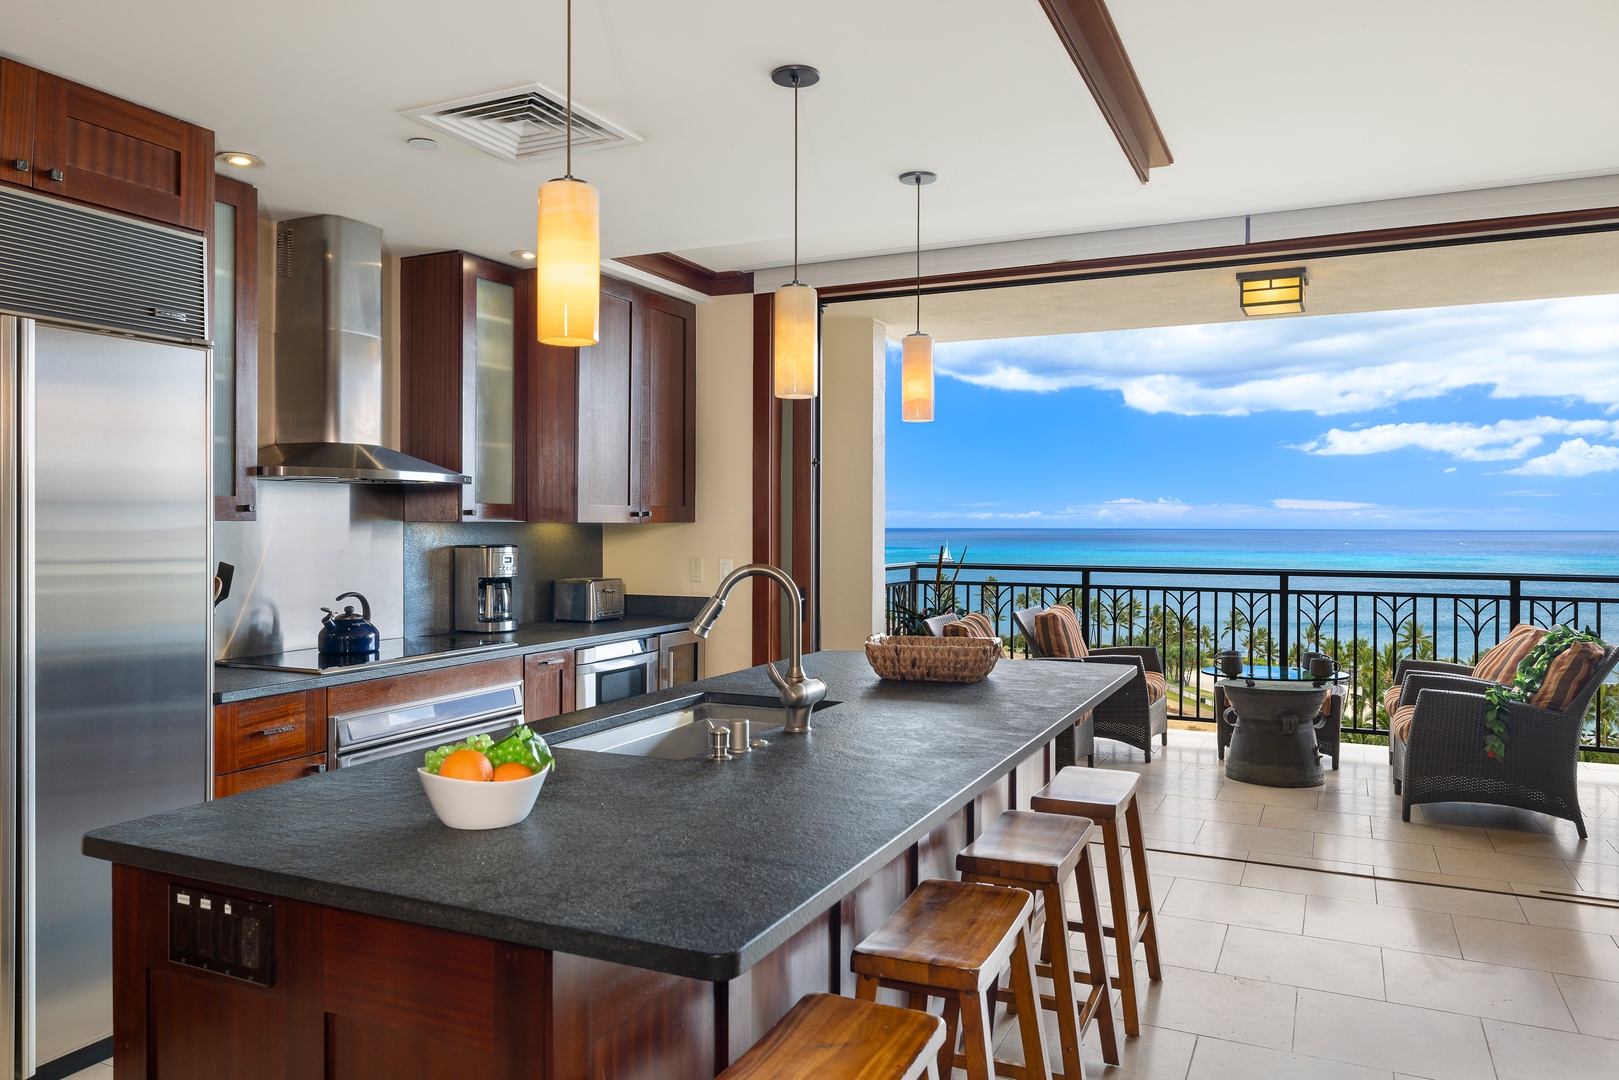 Kapolei Vacation Rentals, Ko Olina Beach Villas O1105 - The view from the kitchen looking to the lanai and beyond.